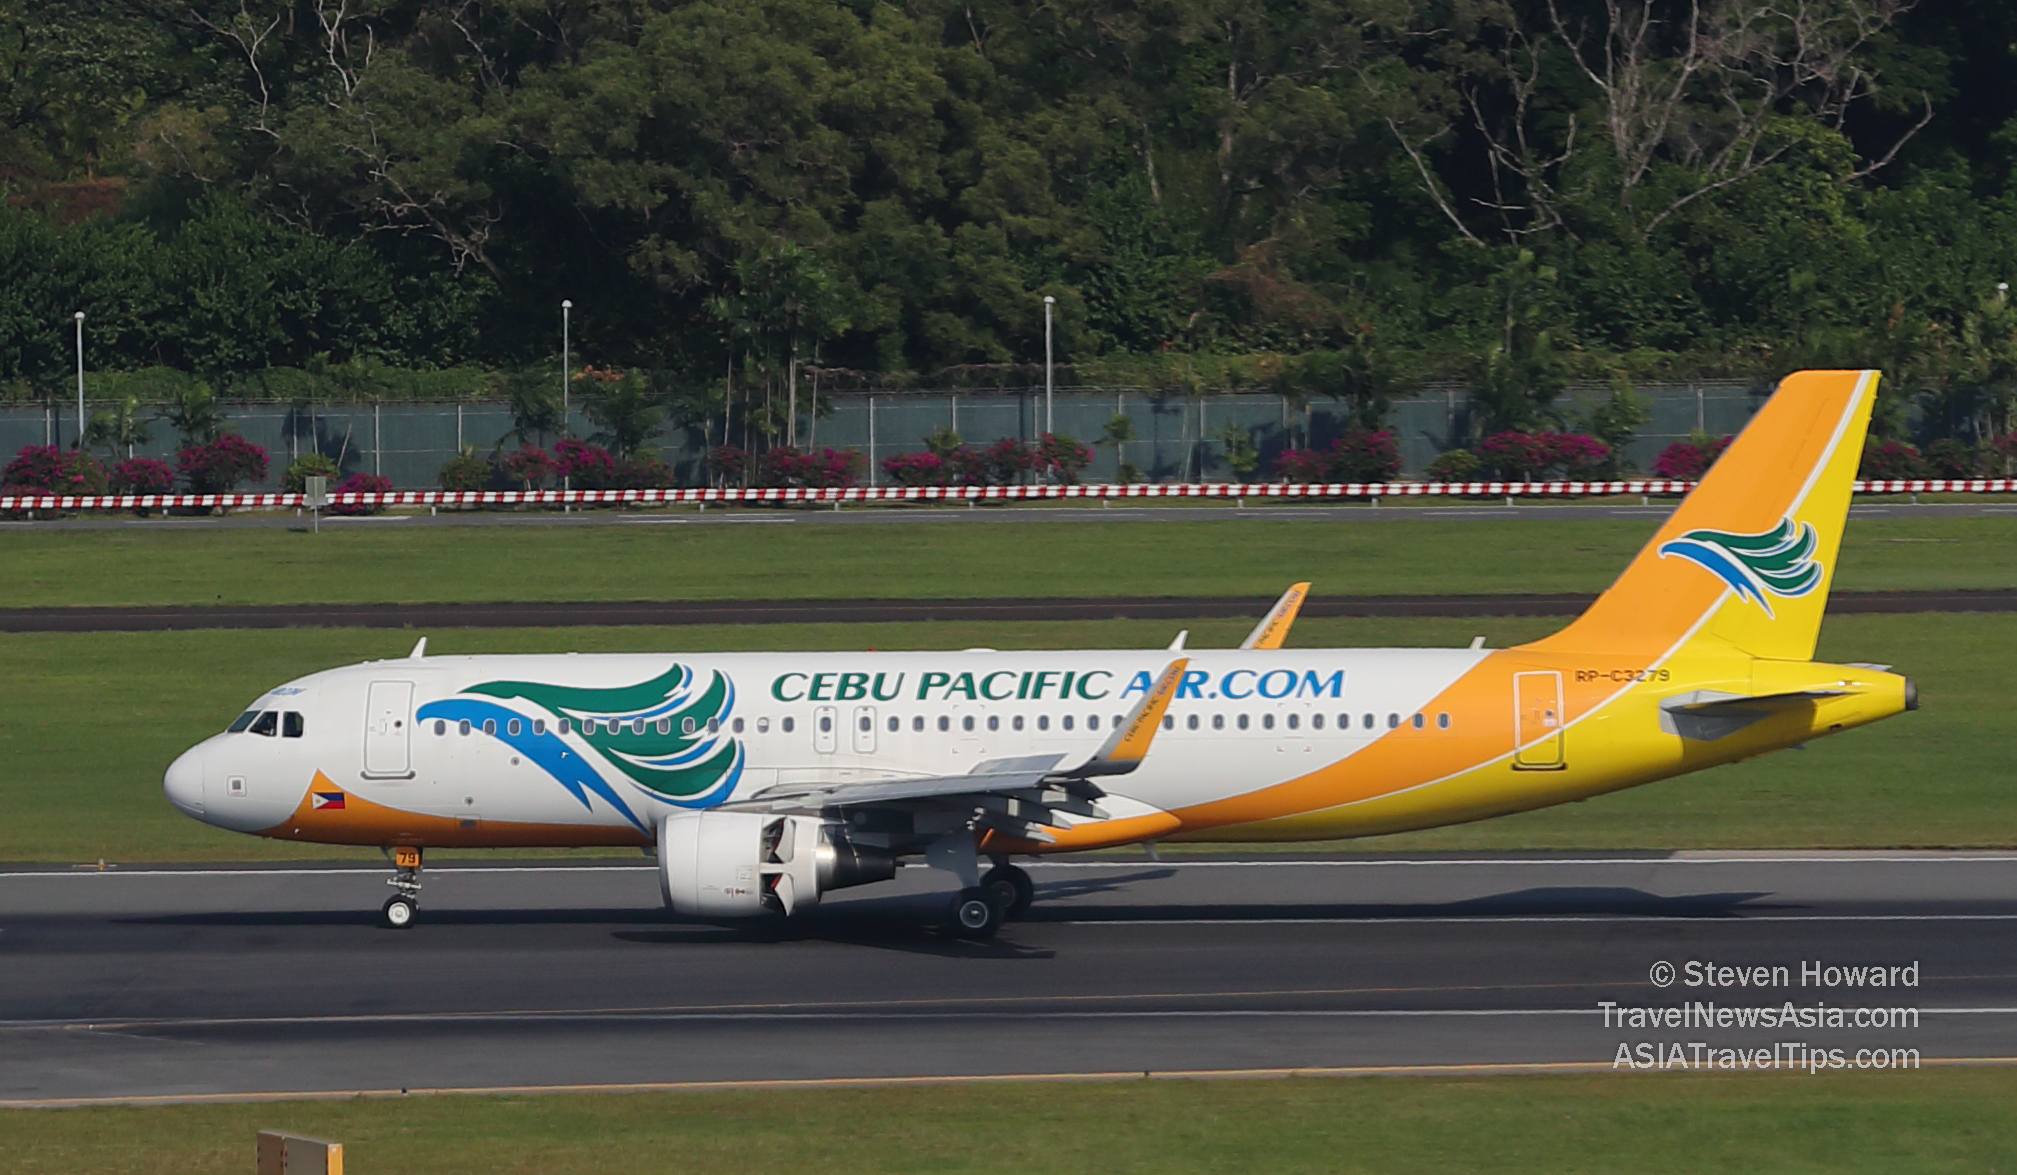 Cebu Pacific Airbus A320 reg: RP-C3279. Picture taken by Steven Howard of TravelNewsAsia.com at Changi Airport in Singapore. Click to enlarge.